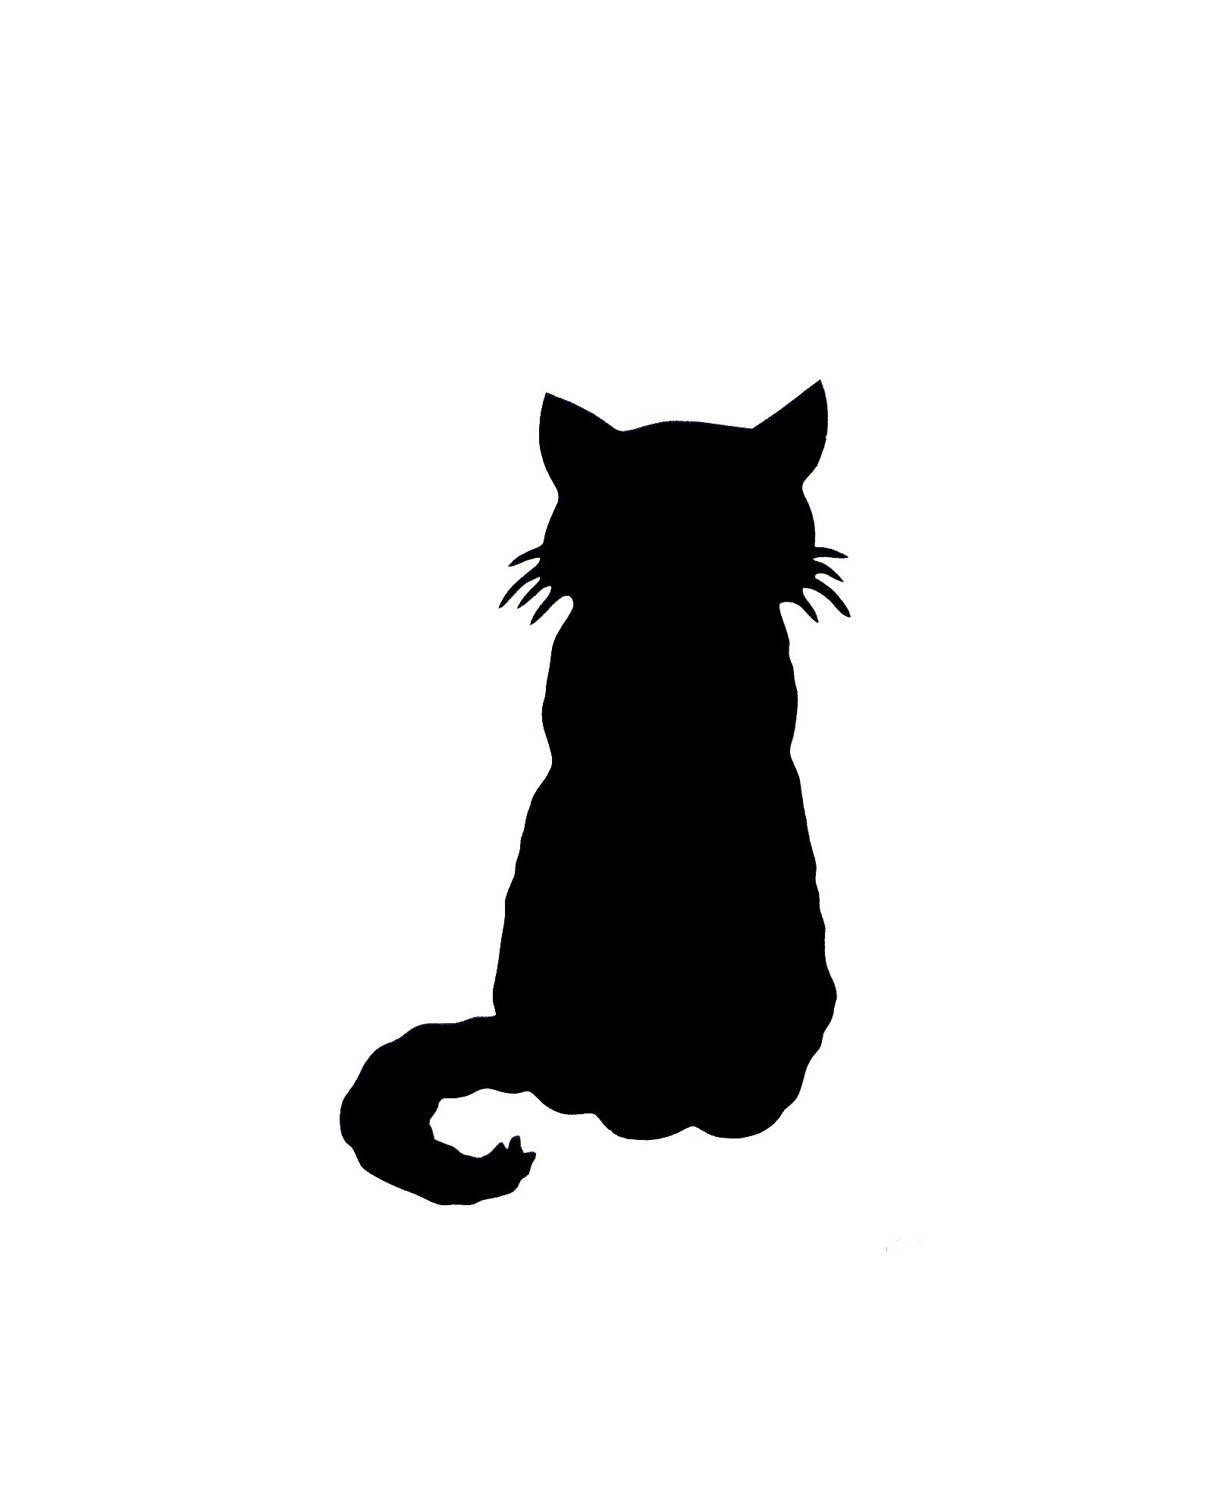 Sitting Cat Silhouette   Clipart Best